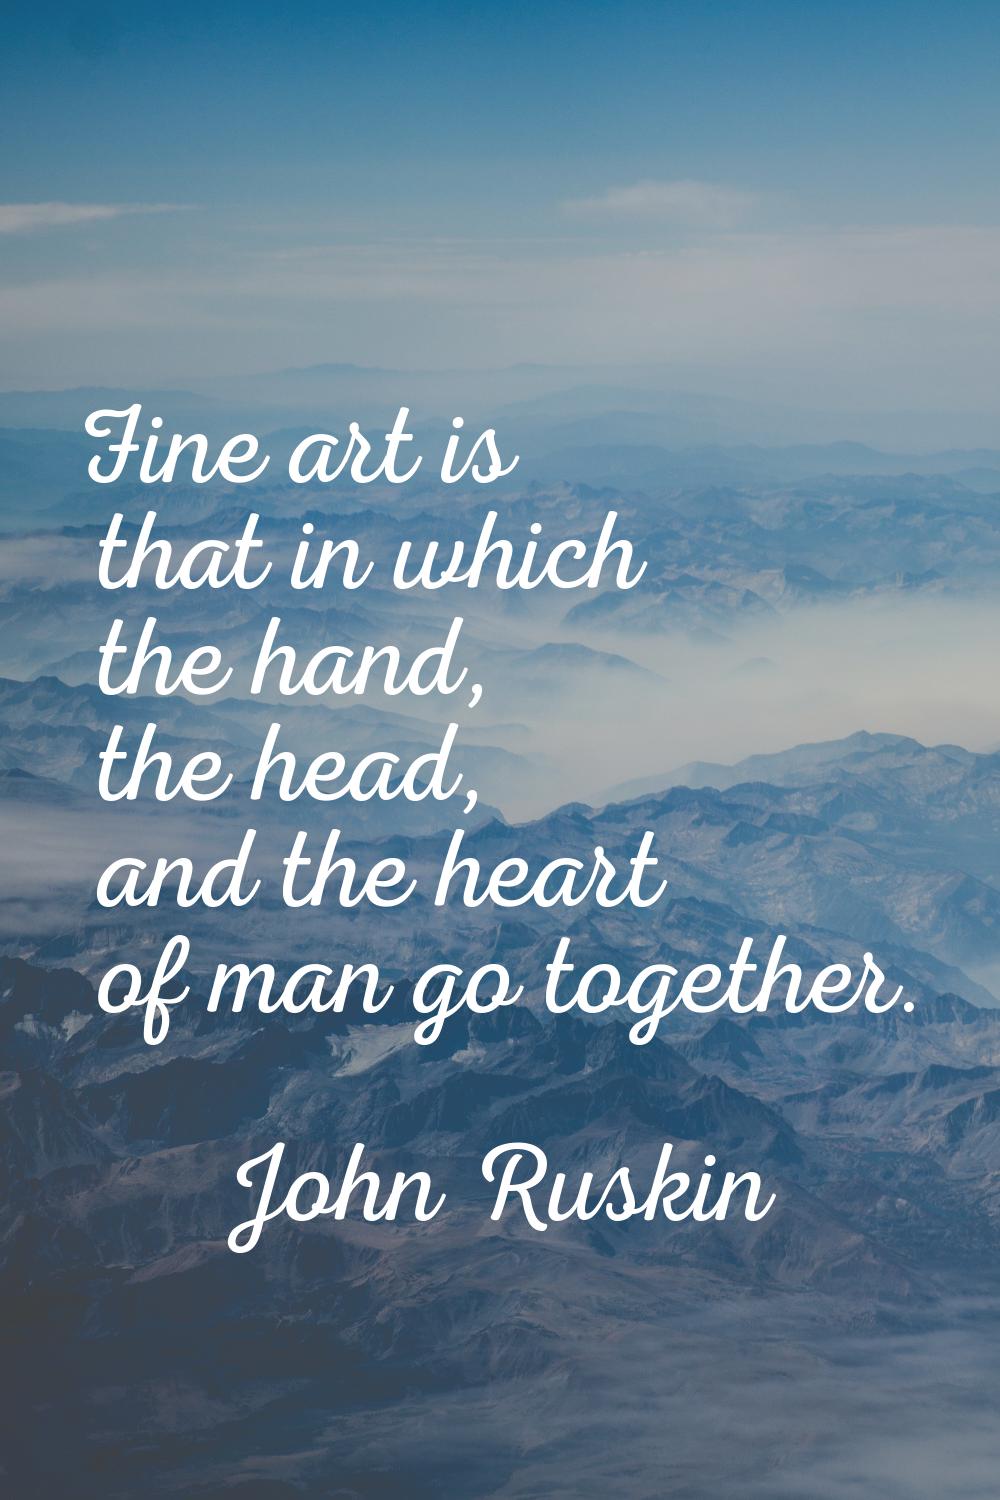 Fine art is that in which the hand, the head, and the heart of man go together.